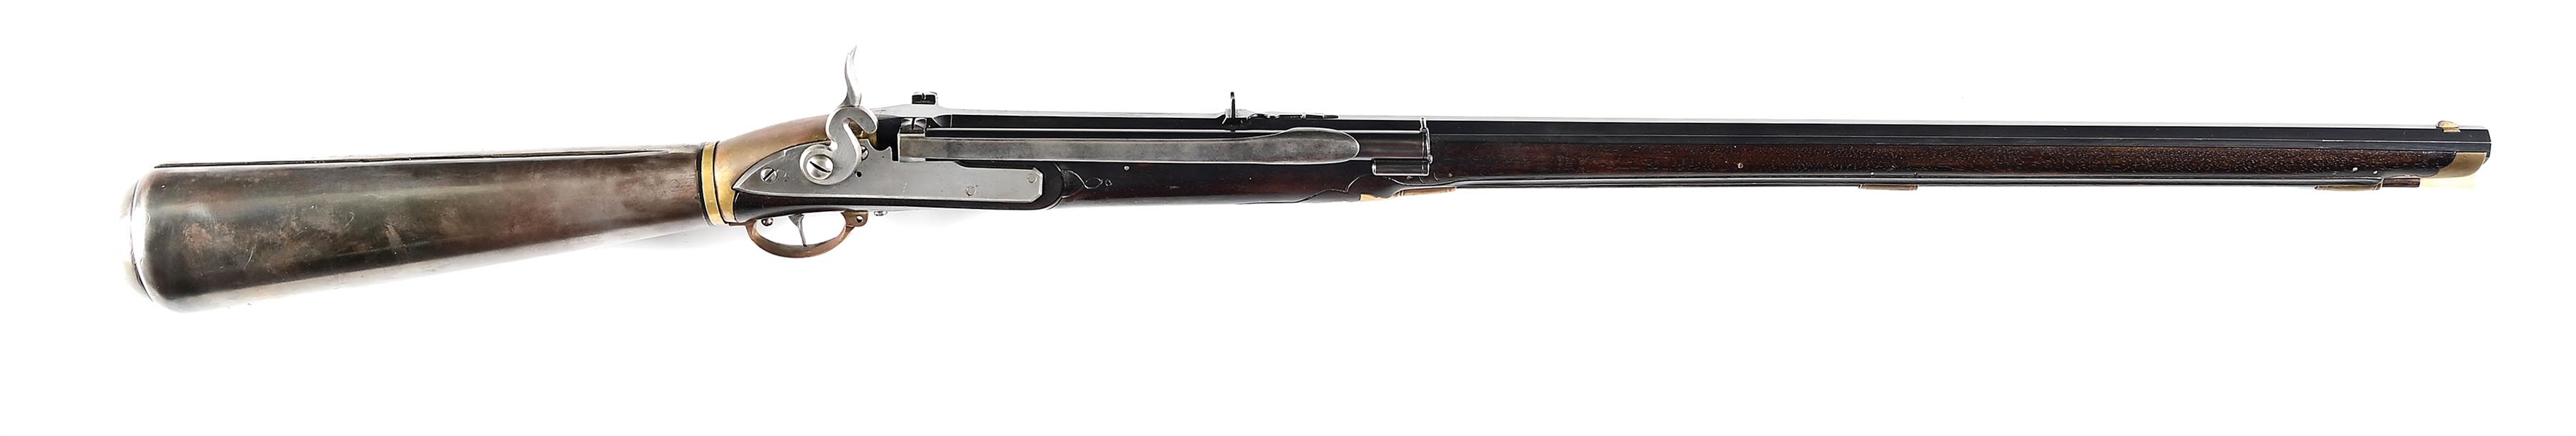 MODERN COPY OF A GIRANDONI AIR RIFLE WITH SHOOTERS KIT MADE BY ERNIE COWAN.